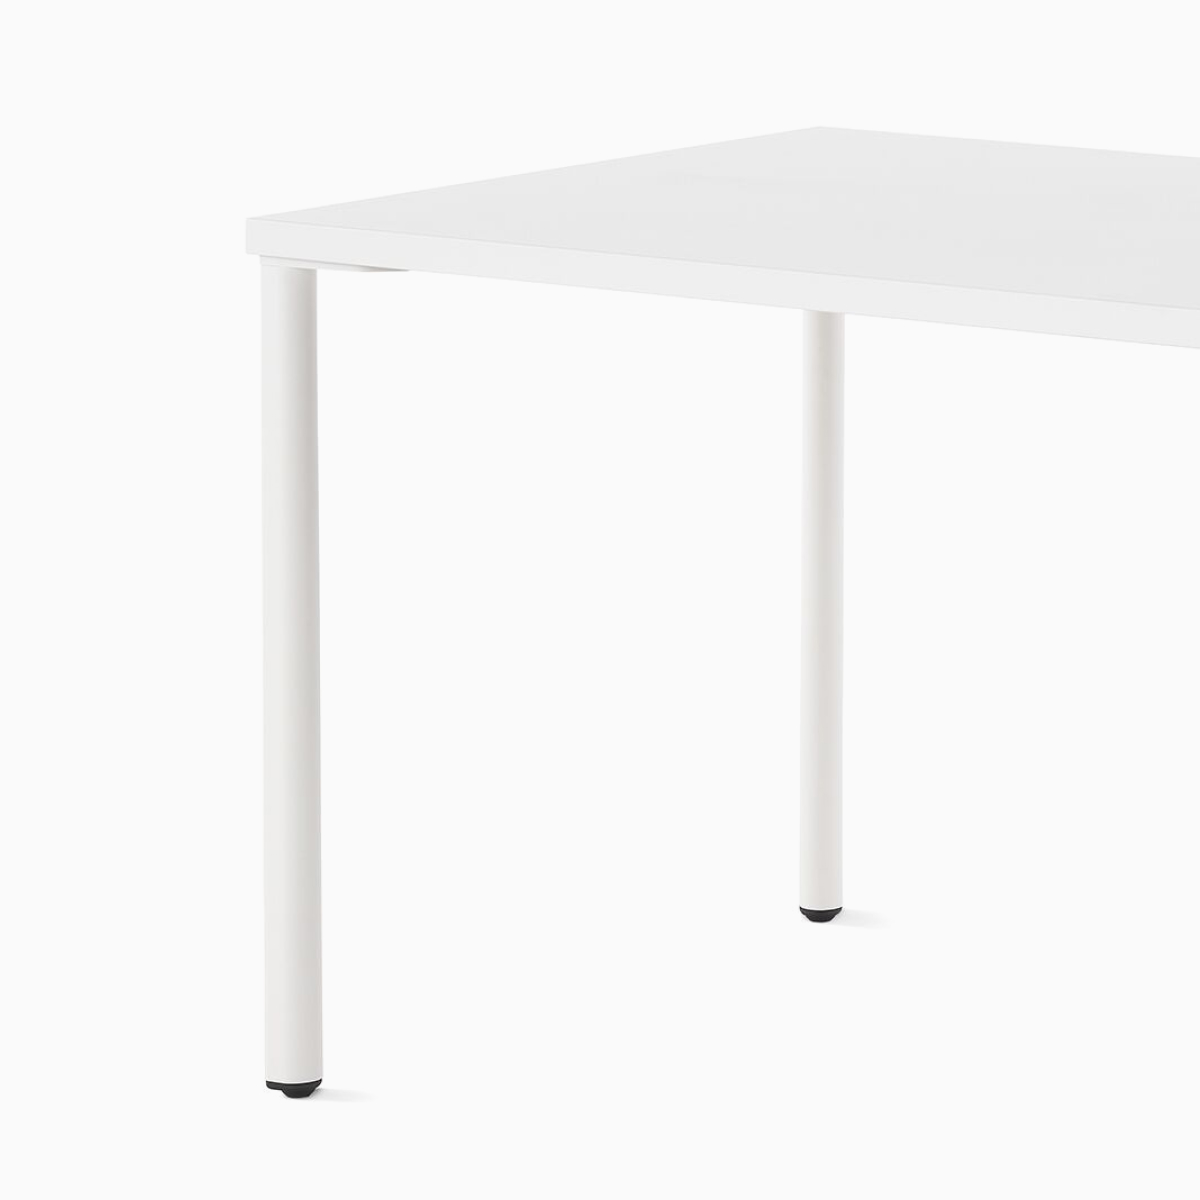 OE1 Rectangular Table with white surface and white legs viewed from an angle.